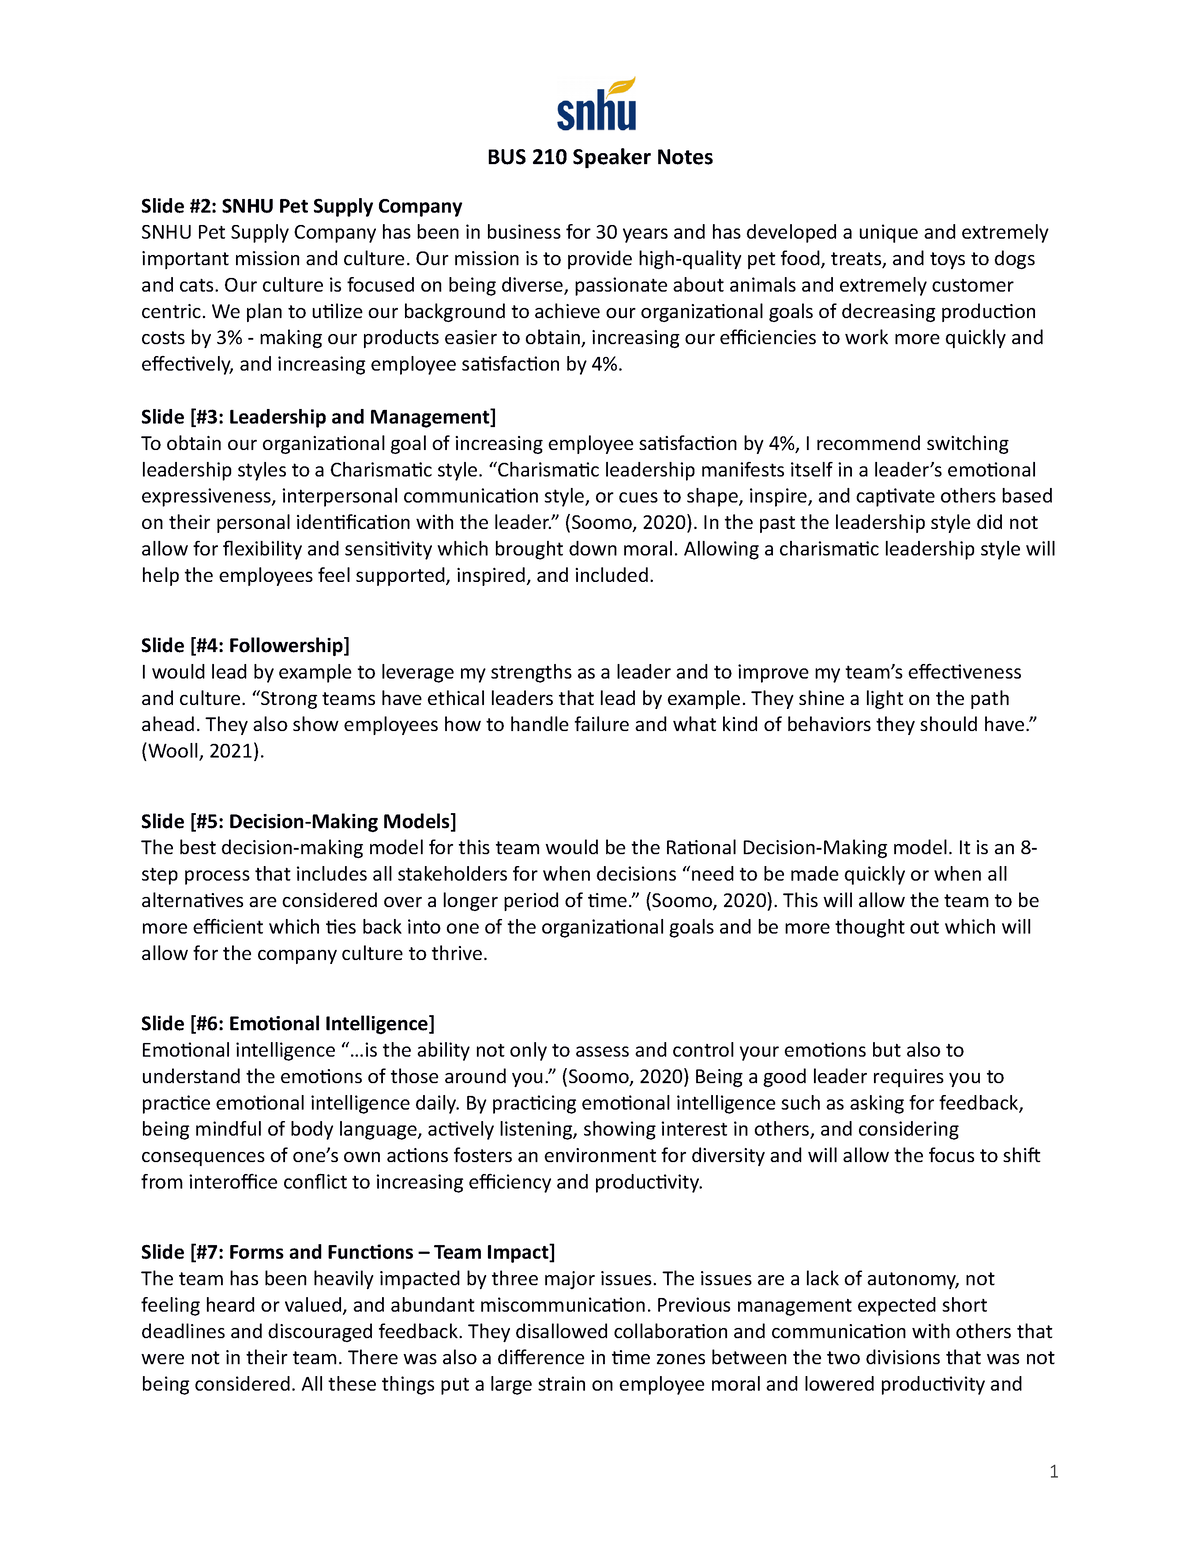 7 3 project one organizational evaluation proposal assignment